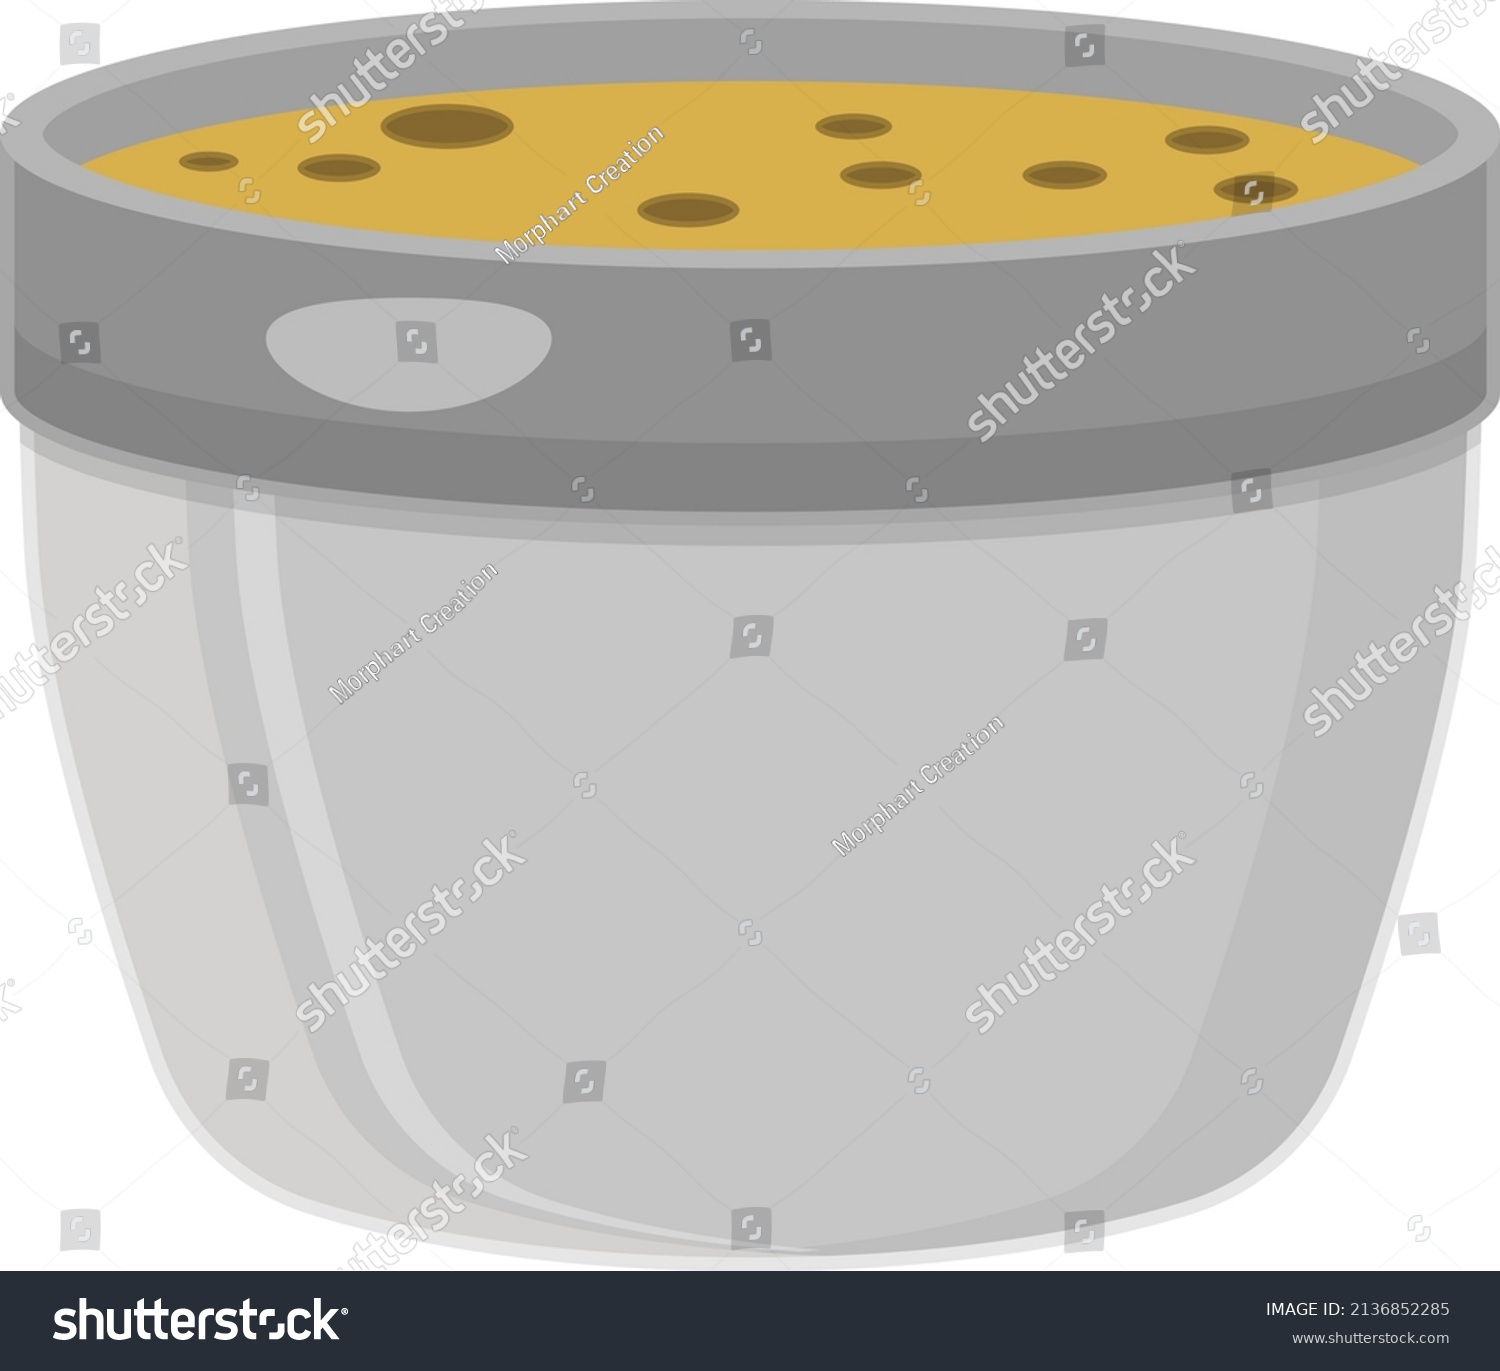 SVG of Mixing bowl with cake batter, illustration, vector on a white background. svg